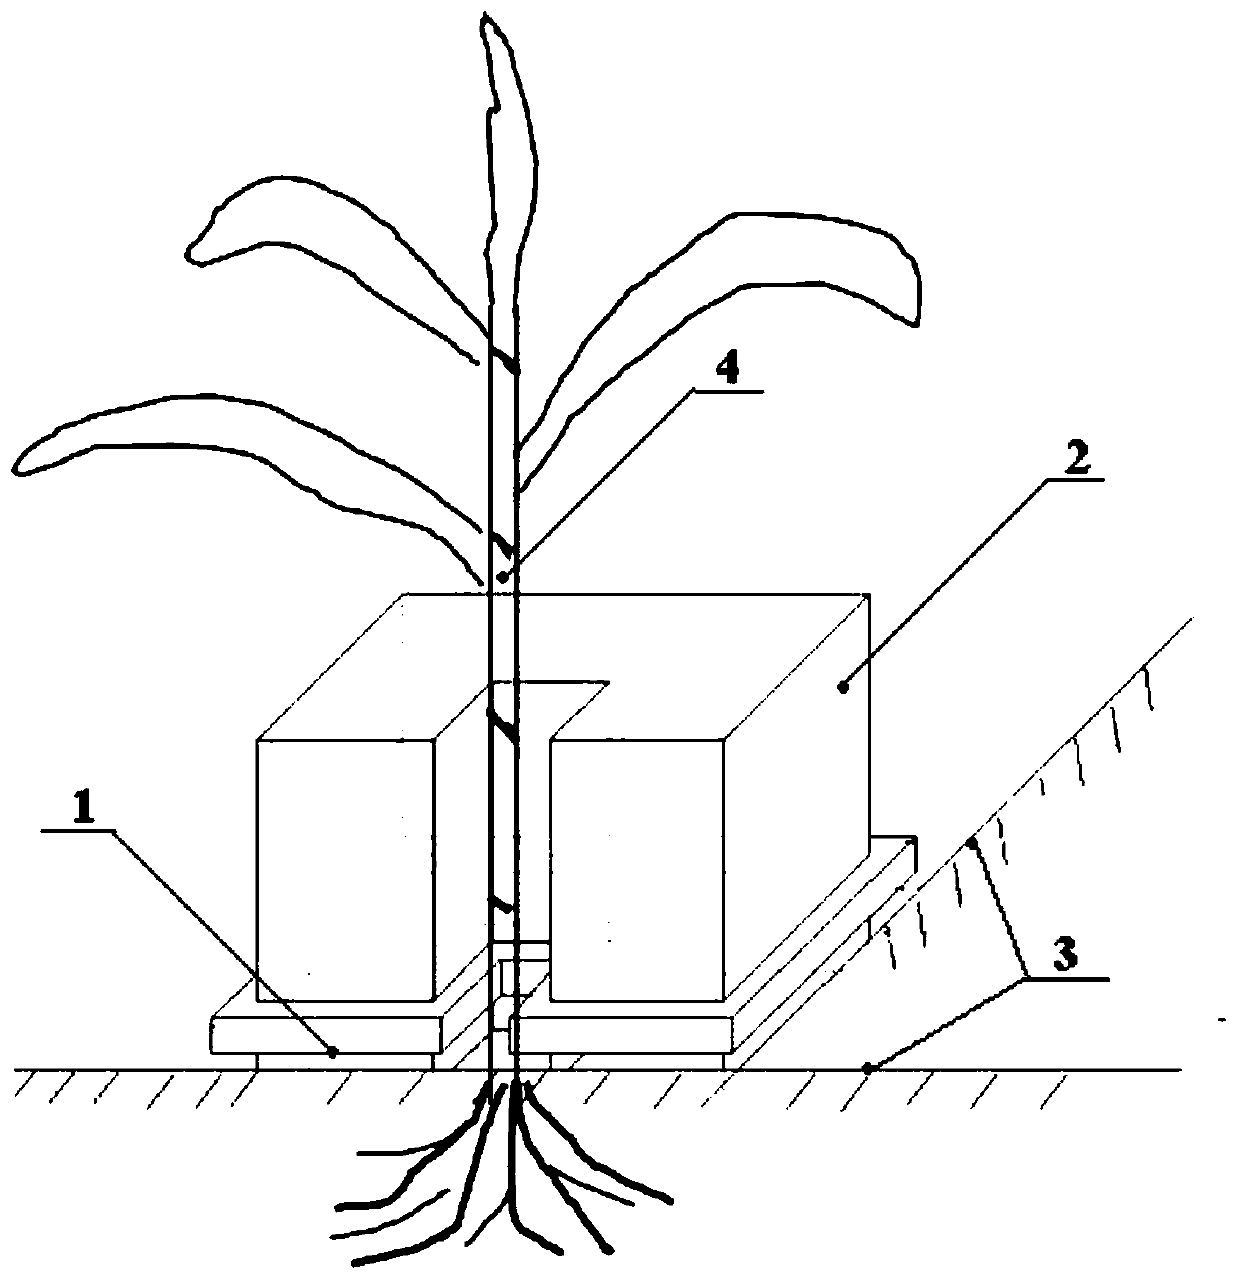 A gas headspace sampling device for root-soil systems of tall plants